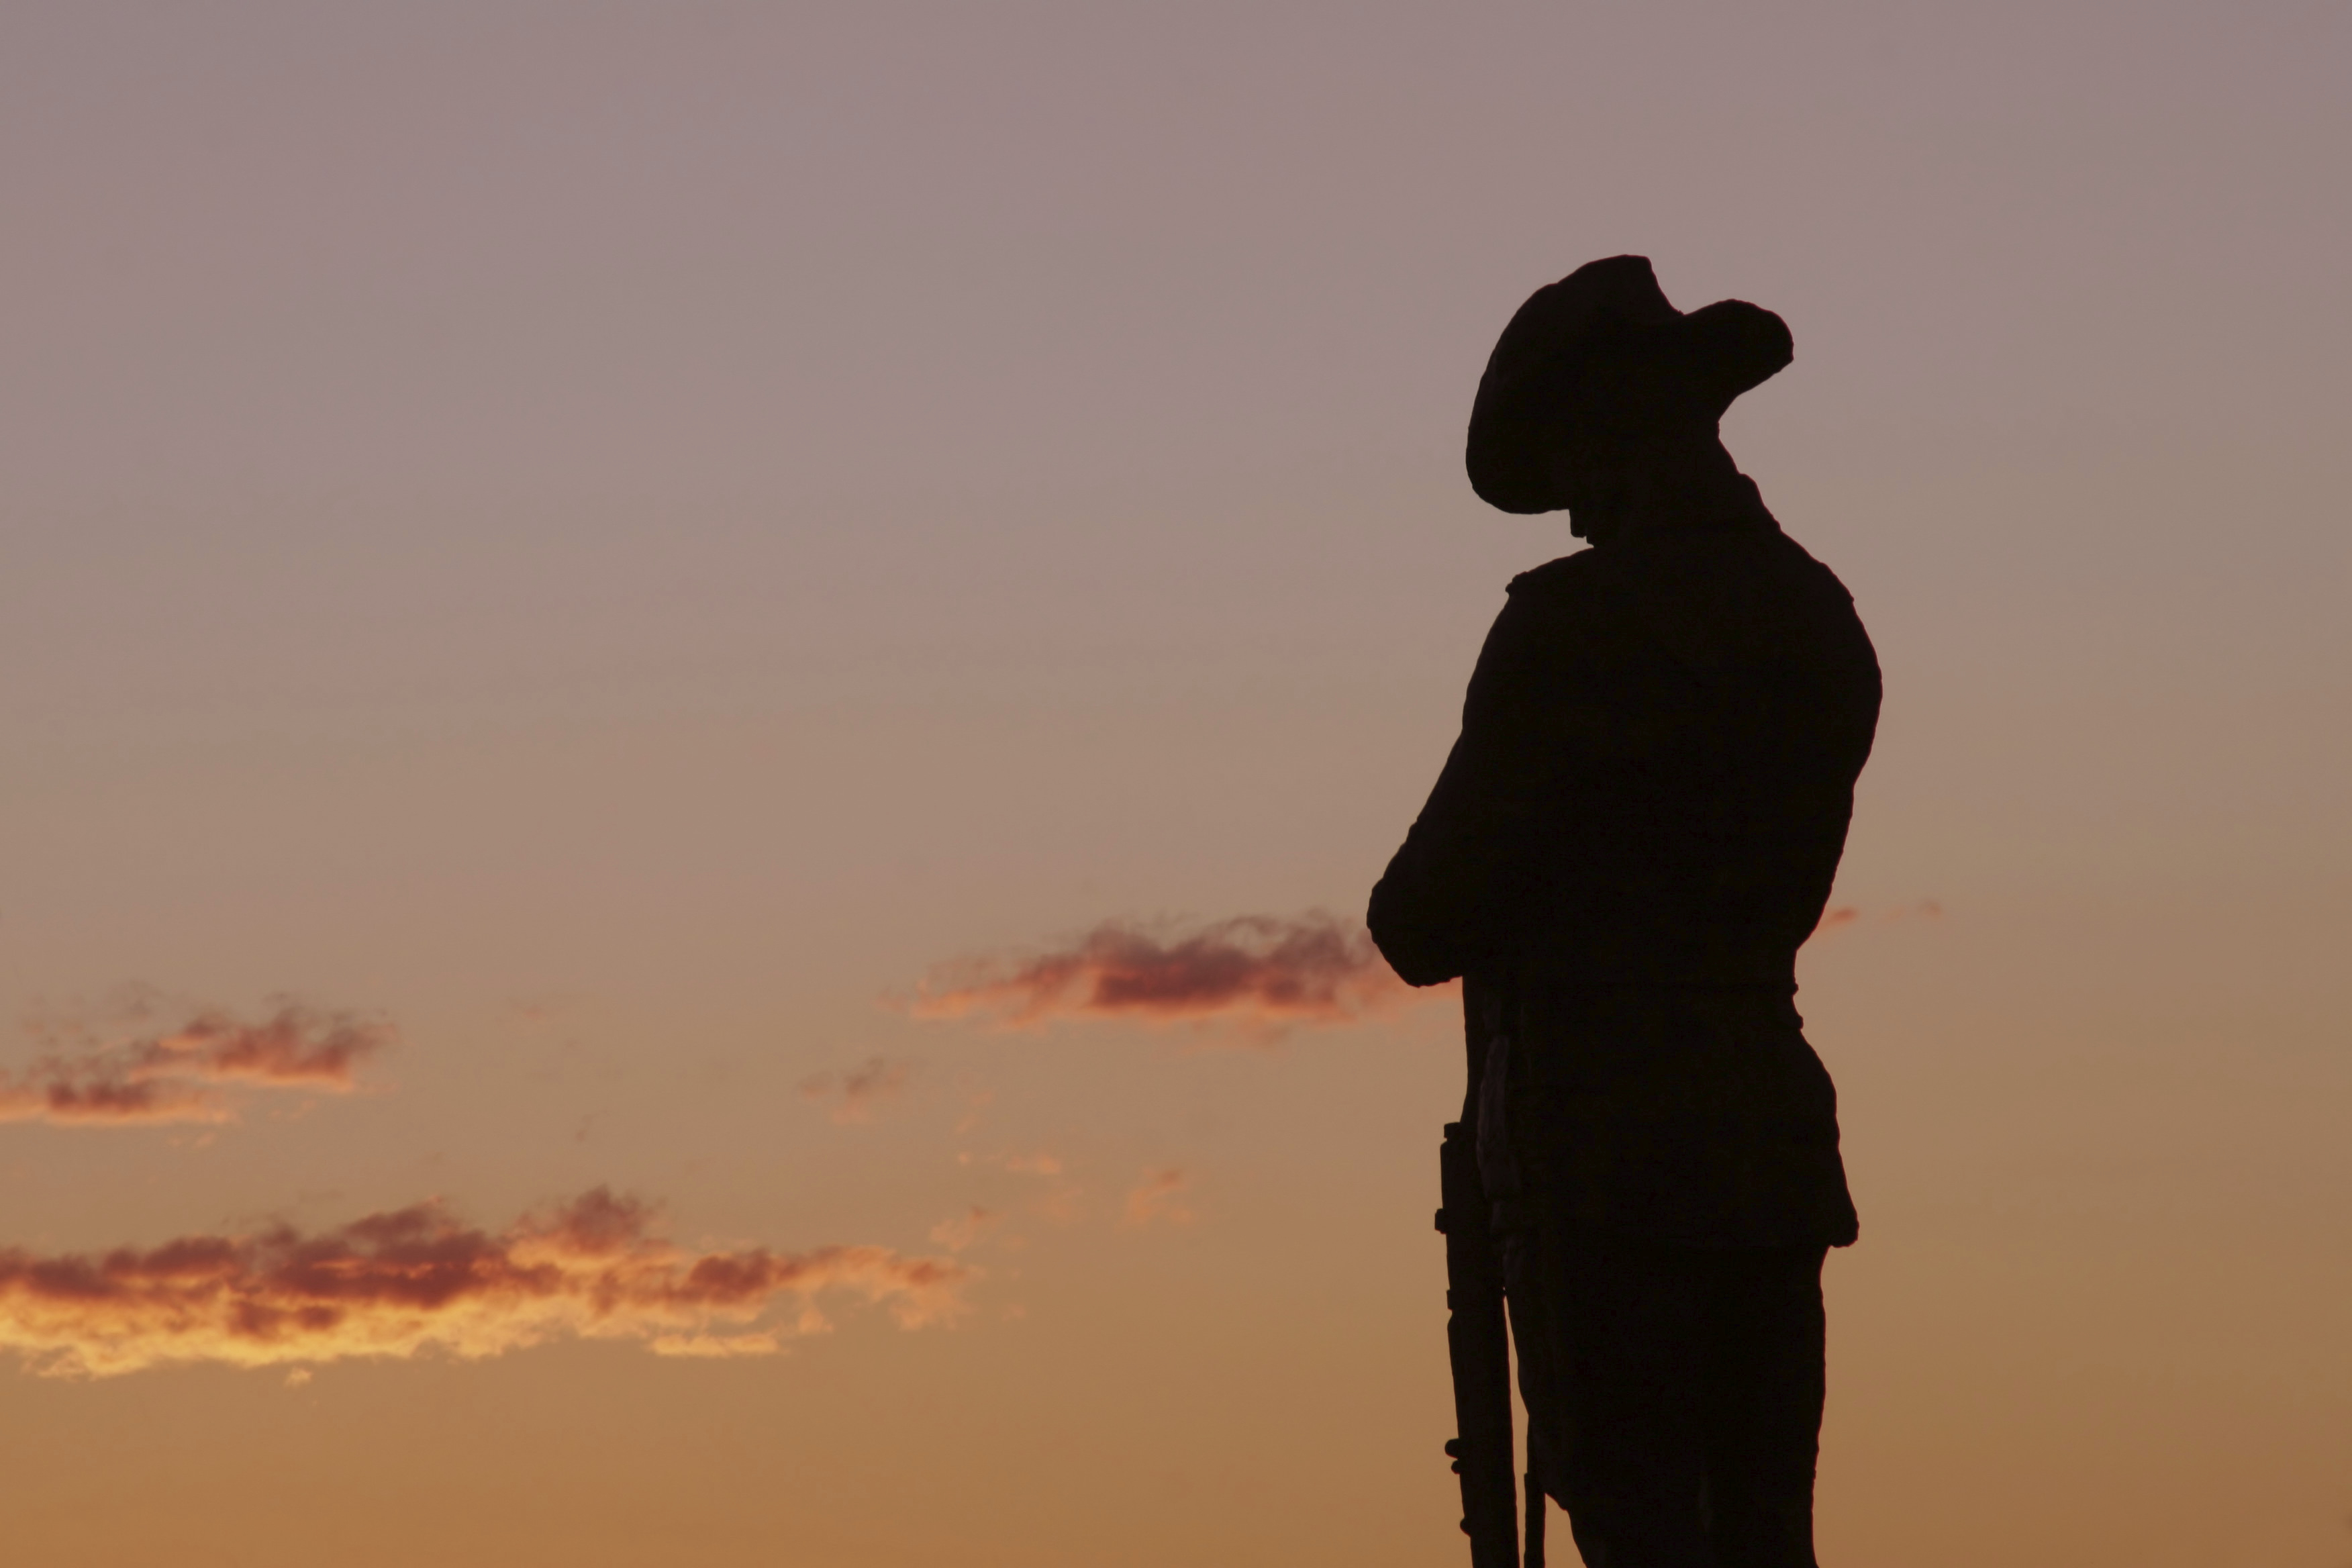 Holiday Anzac Day HD Wallpaper | Background Image